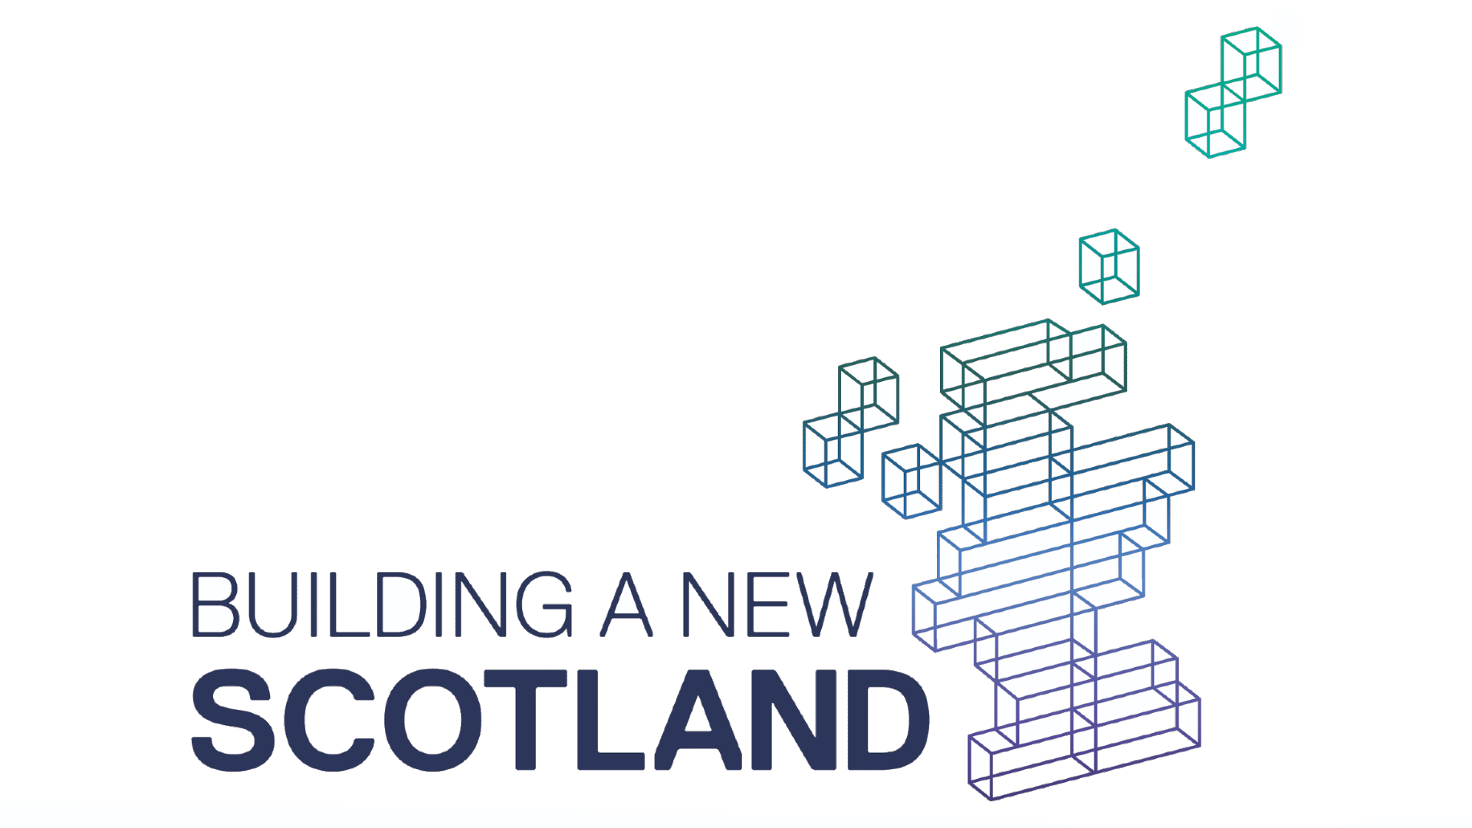 Education and lifelong learning in an independent Scotland